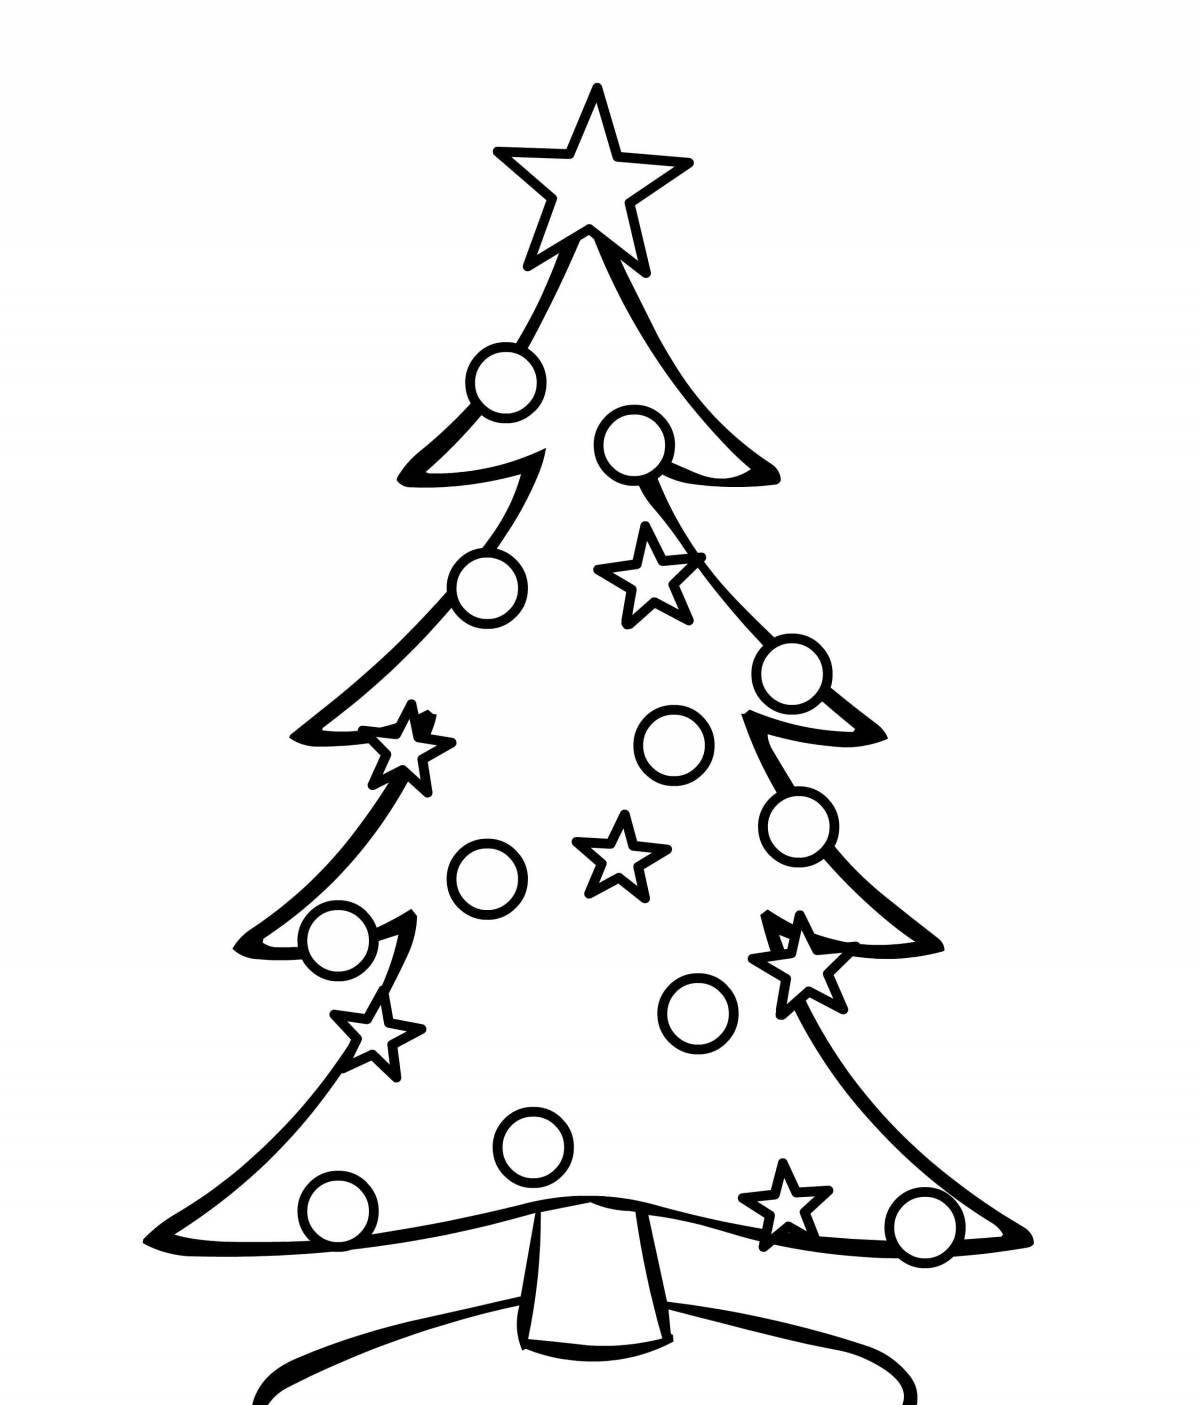 Drawing a Christmas tree for children